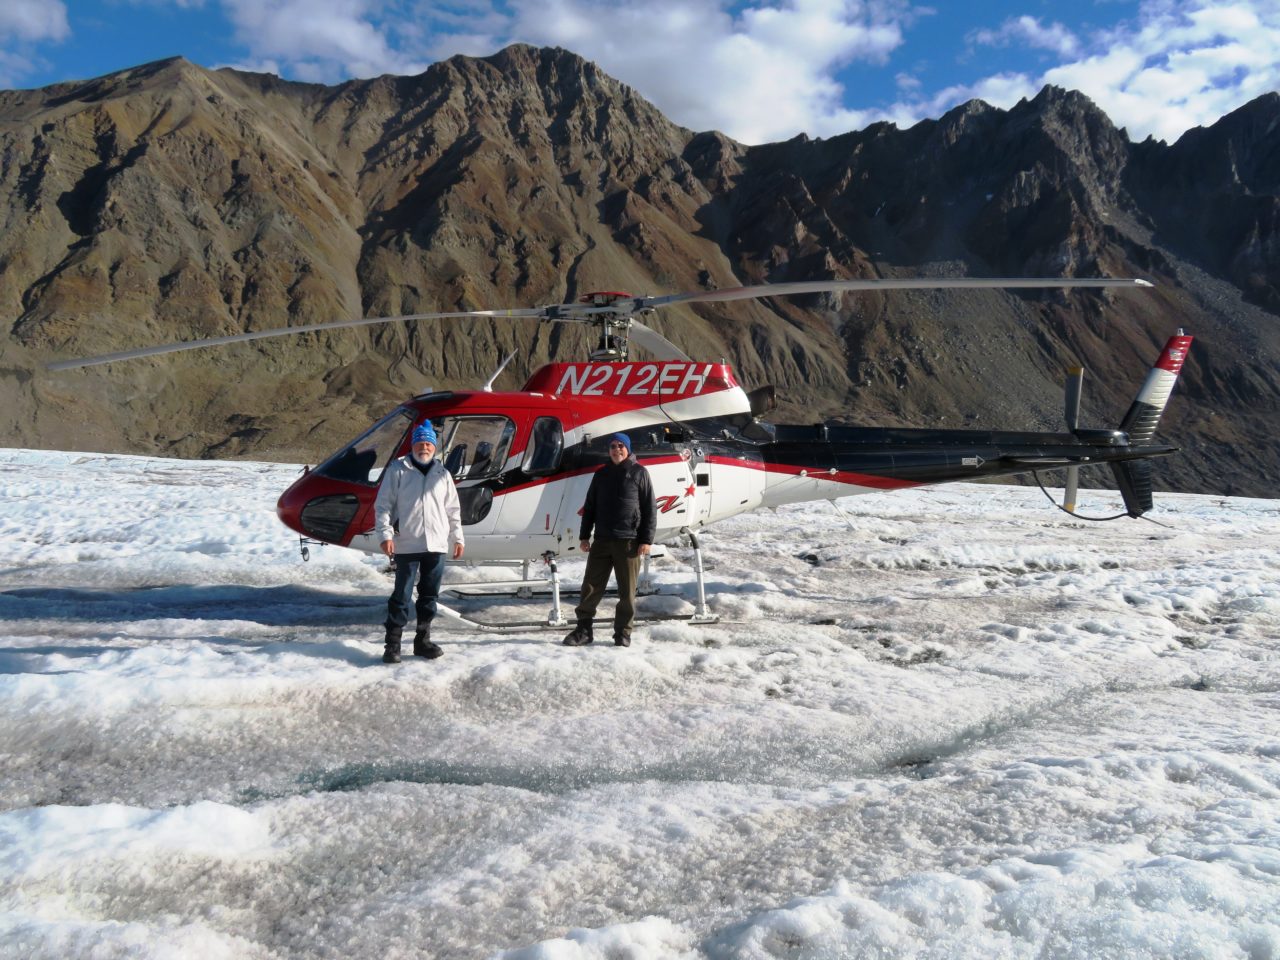 Helicopter landing on a glacier during our Alaska Cruise with Princess Cruises